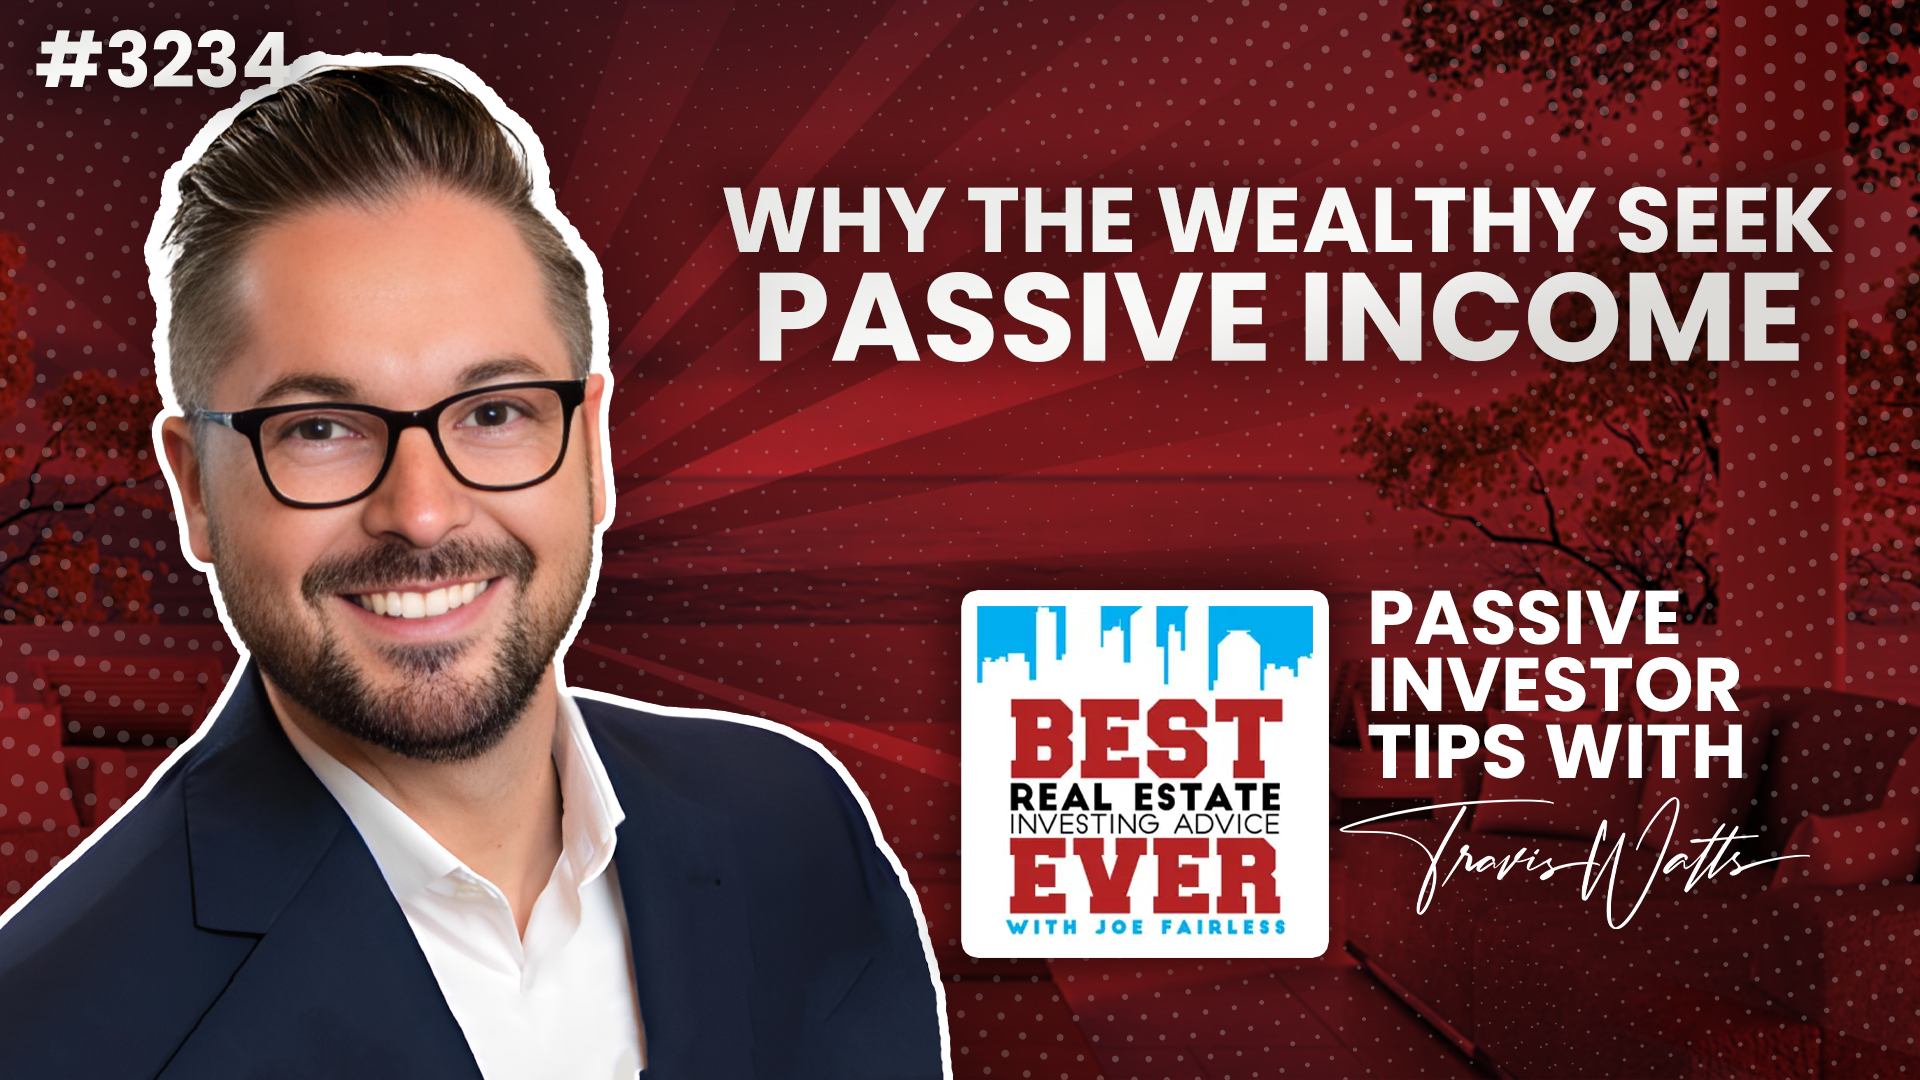 JF3234: Why the Wealthy Seek Passive Income | Passive Investor Tips ft. Travis Watts